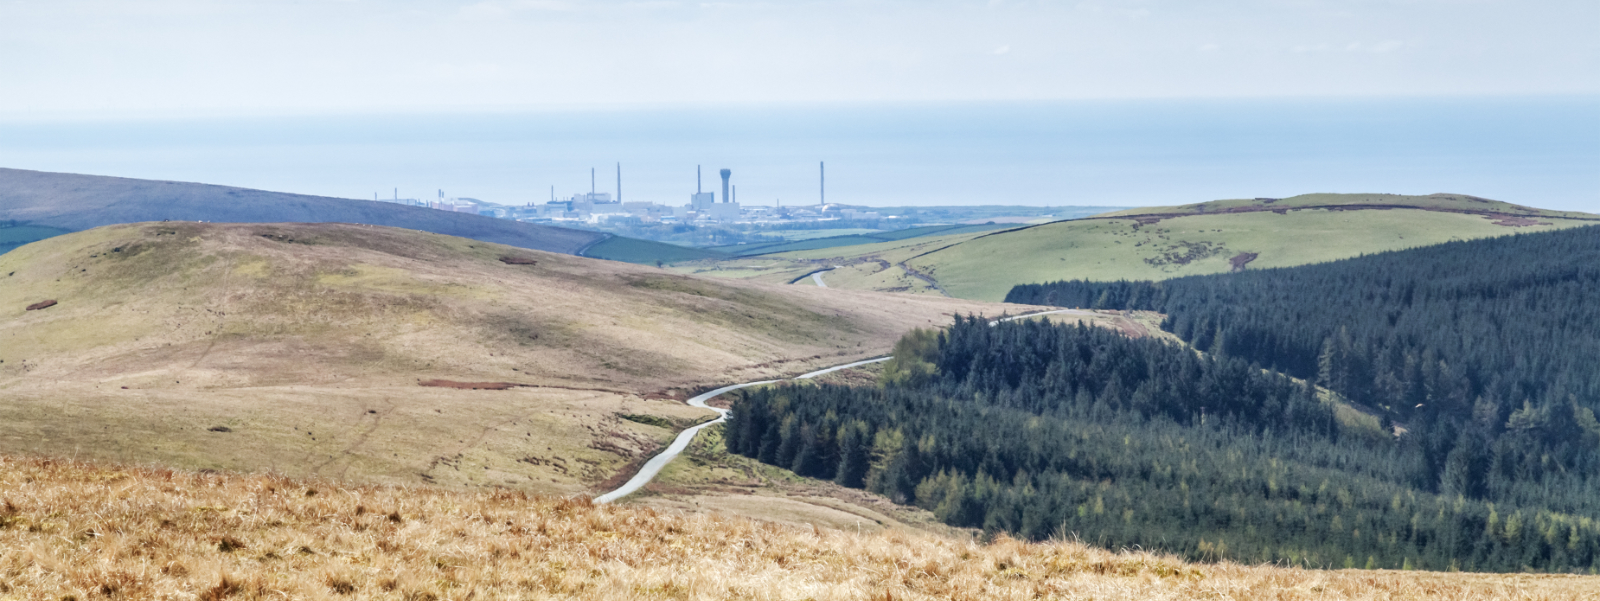 View across to the Sellafield Nuclear Power Plant in Cumbria